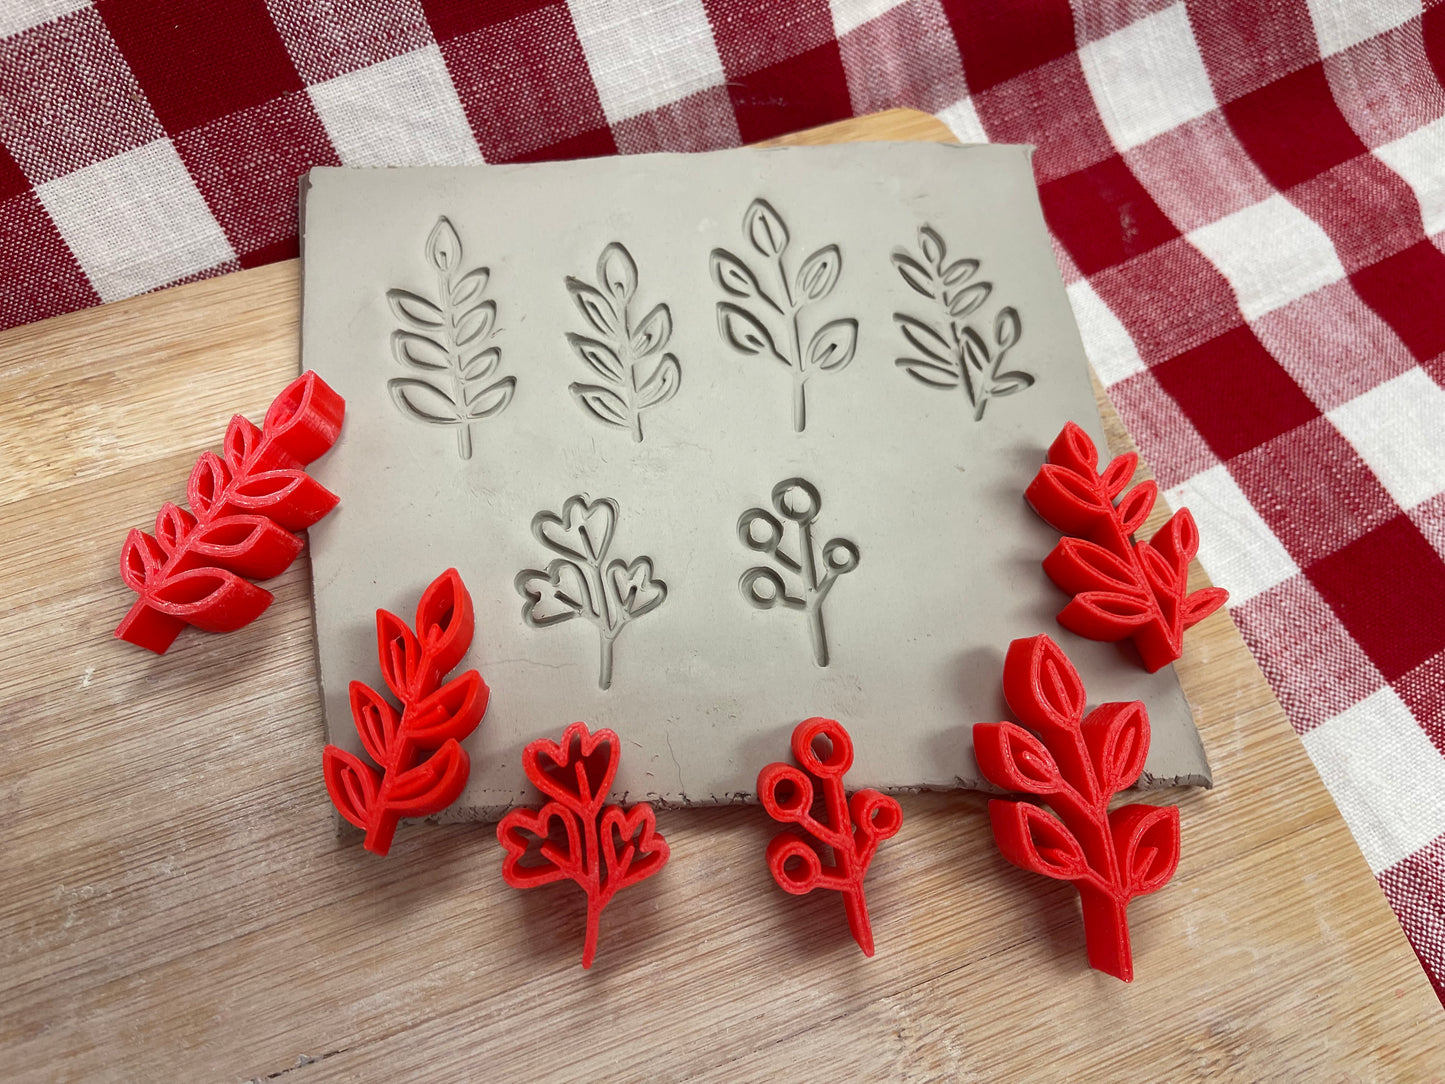 Autumn Elements Stamp Series - Mini Greenery/Branches design set of 6, plastic 3D printed, Pottery Tool